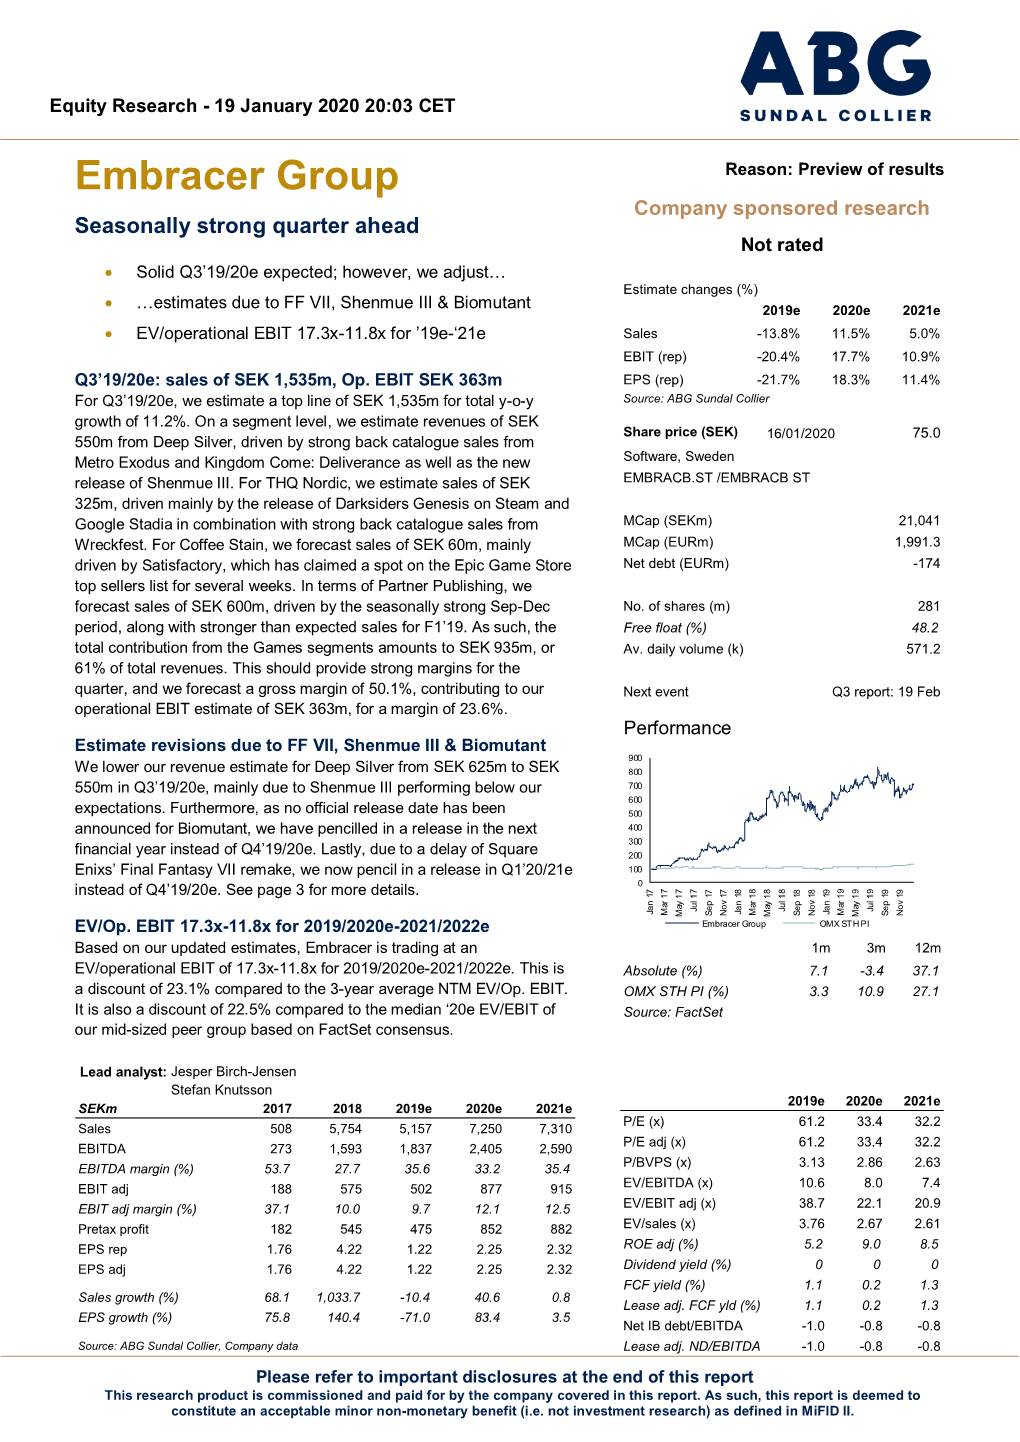 Embracer Group Reason: Preview of Results Company Sponsored Research Seasonally Strong Quarter Ahead Not Rated